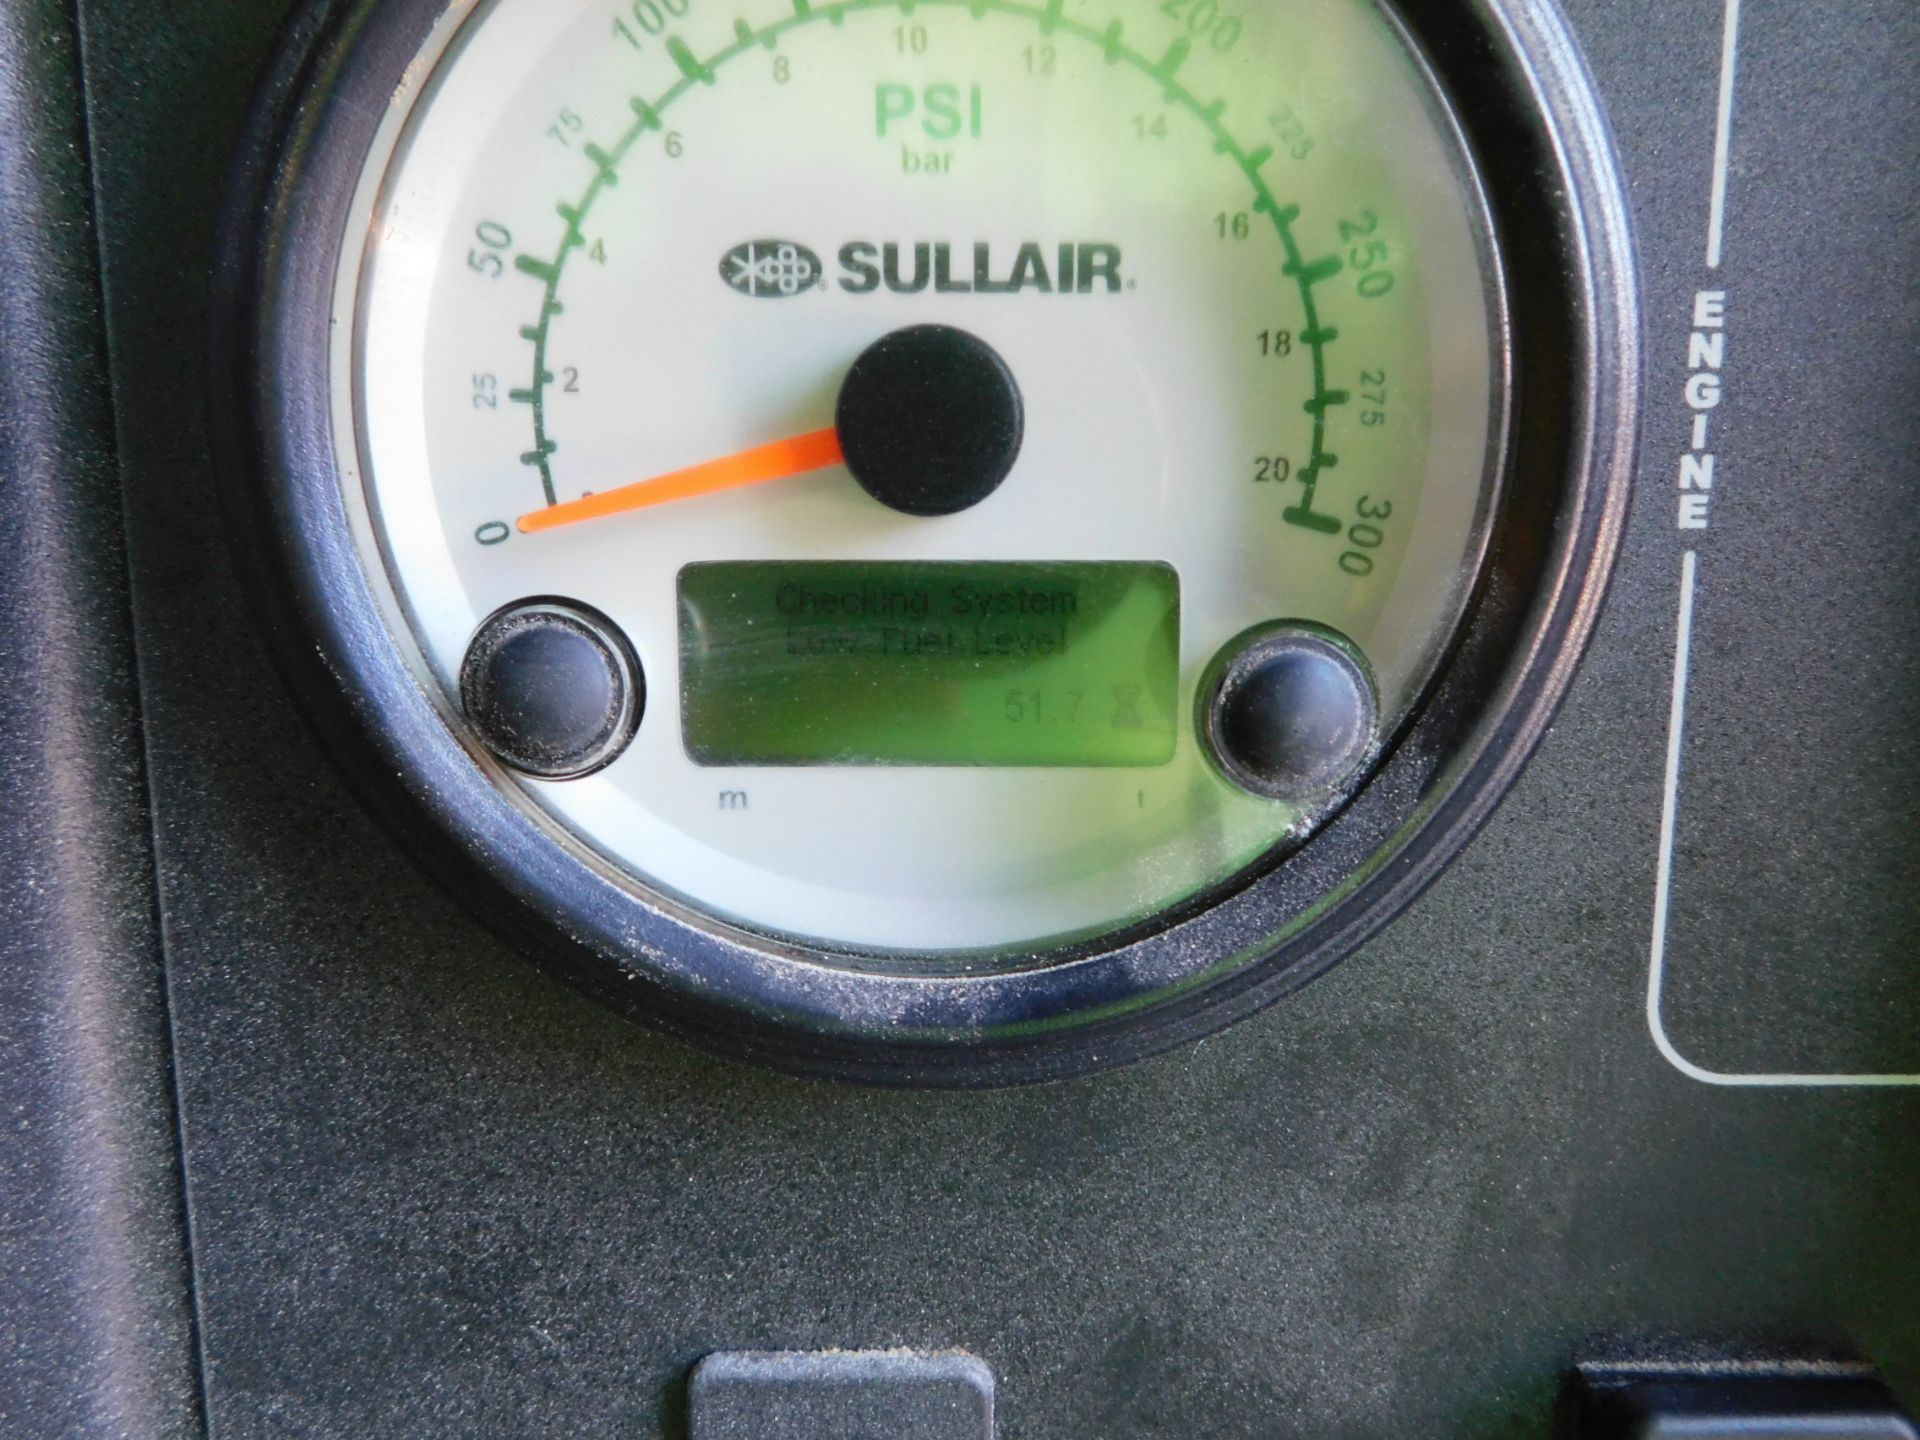 Sullair Model 185-D DPQKU4F Diesel Powered Portble Air Compressor sn2020002250033, New in 2020, - Image 12 of 16